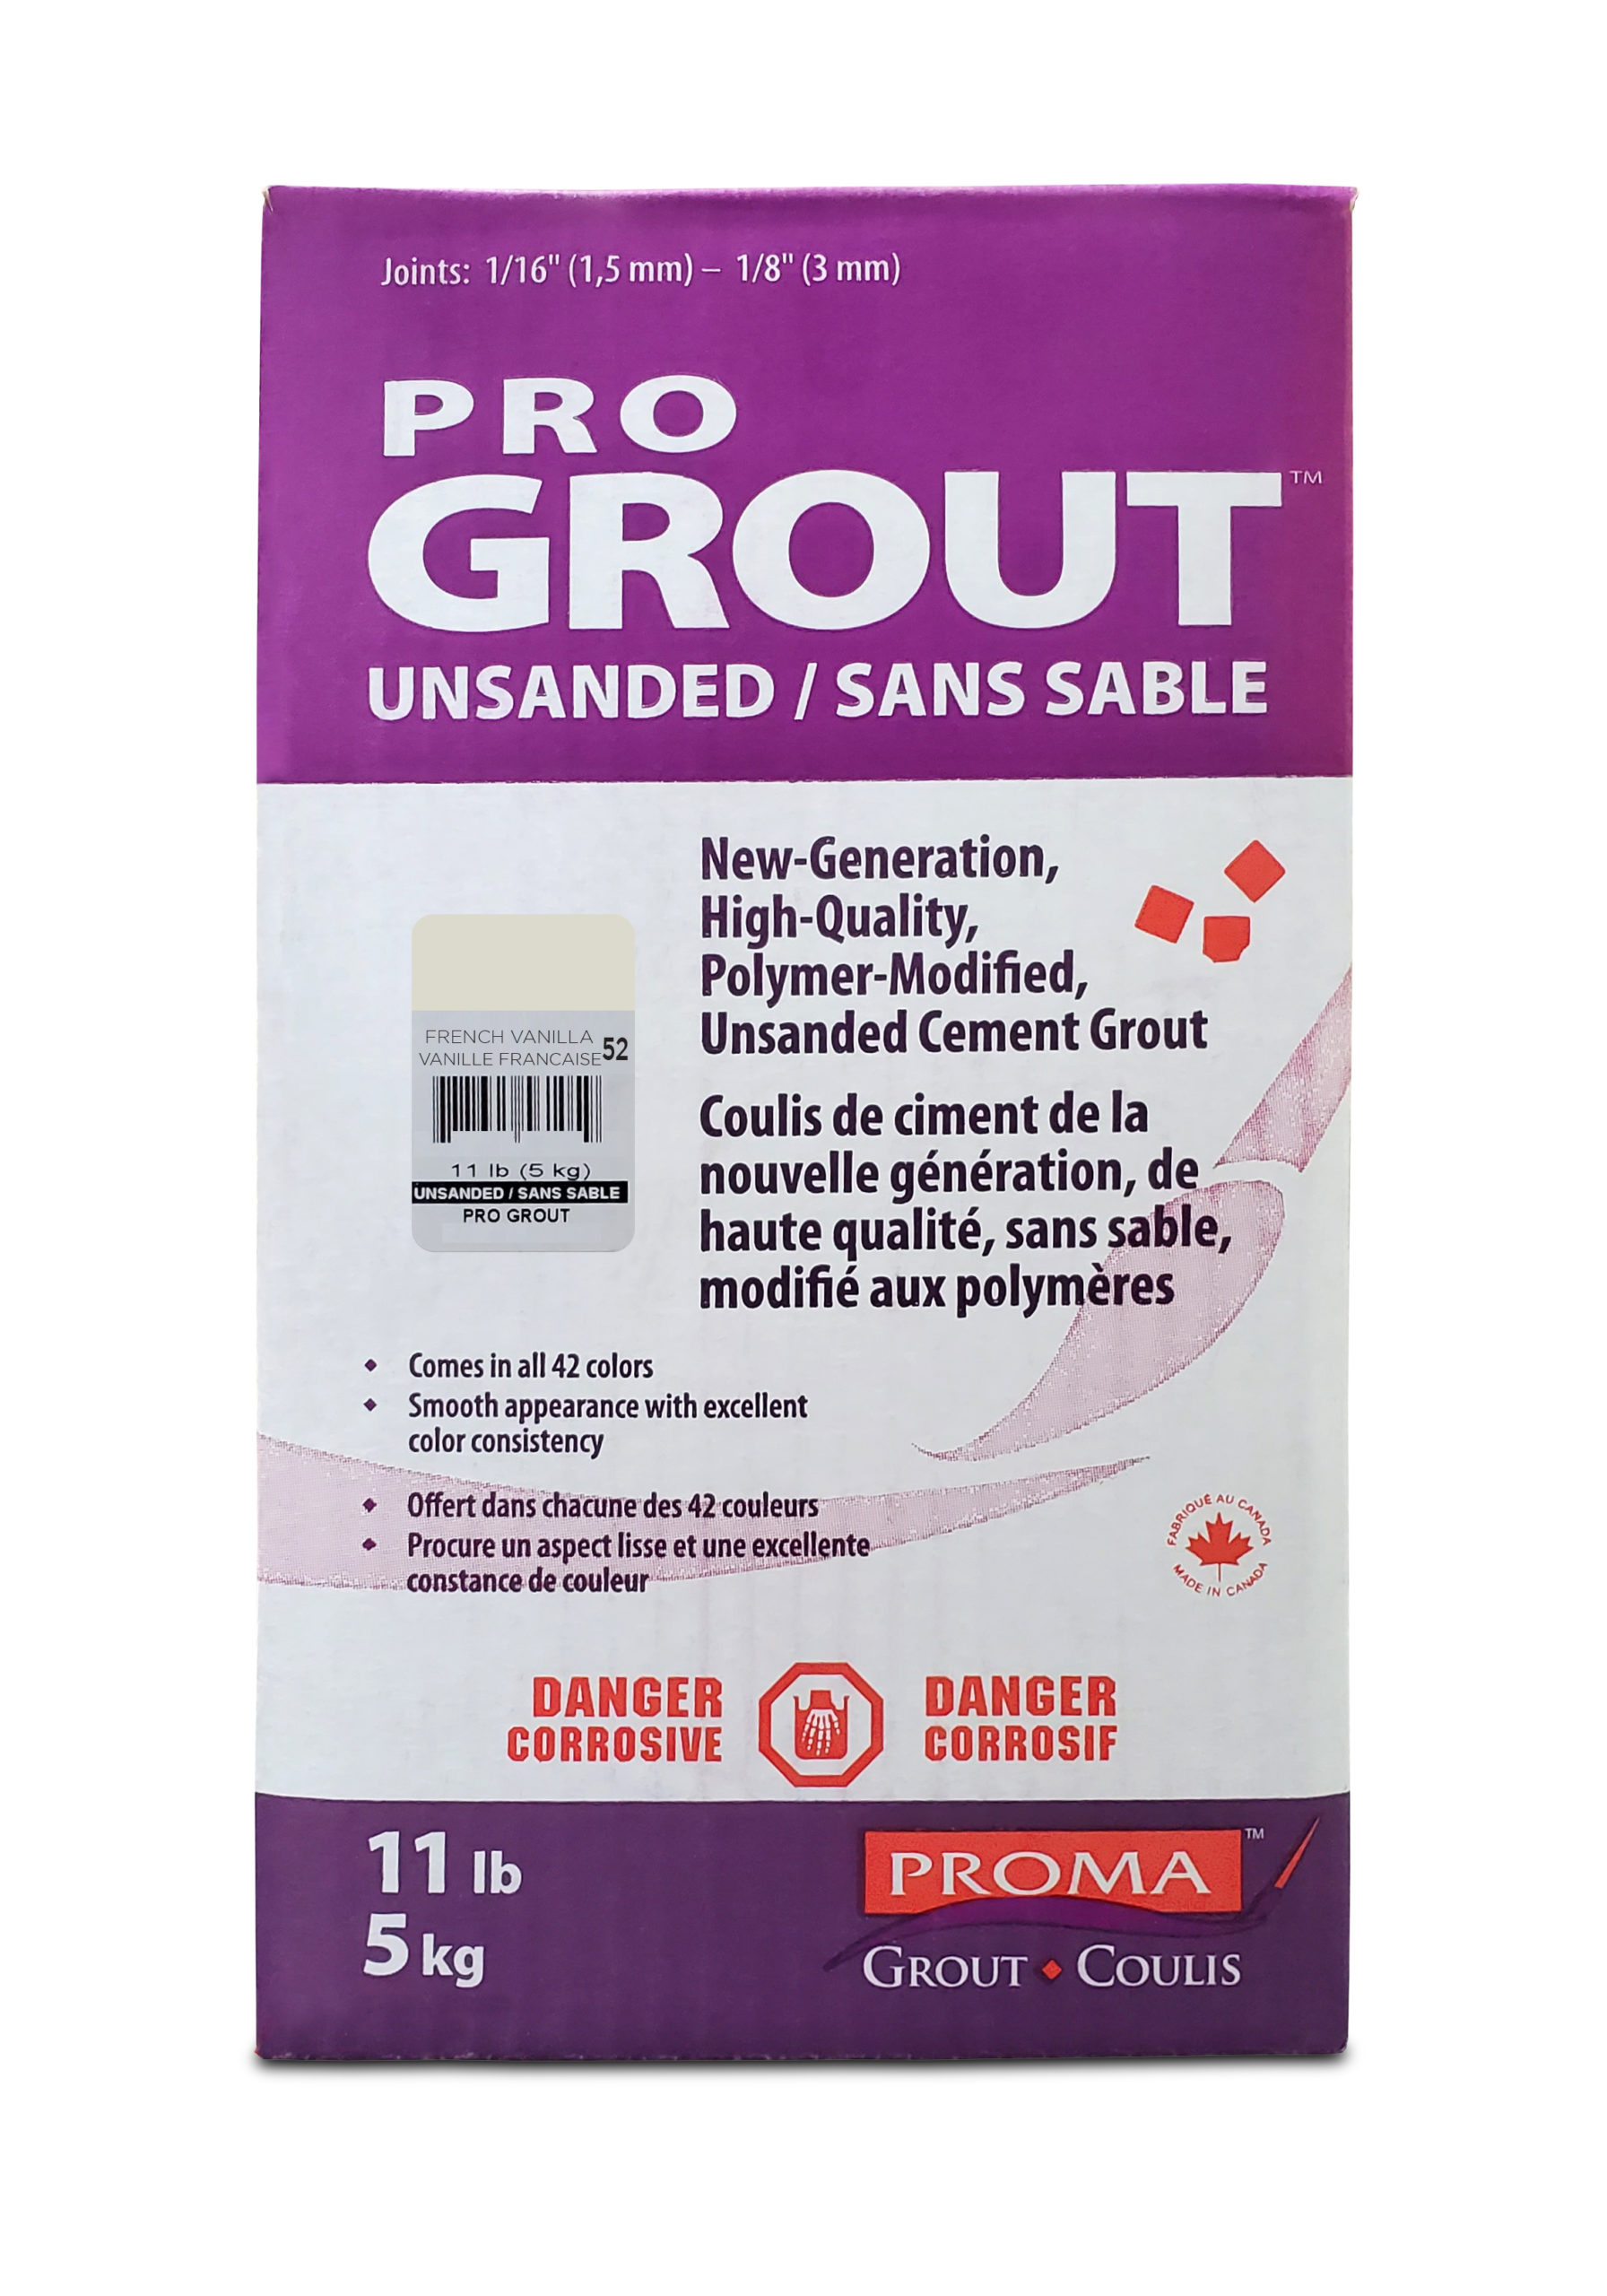 Pro Grout – Unsanded_French Vanilla_5kg_11lb